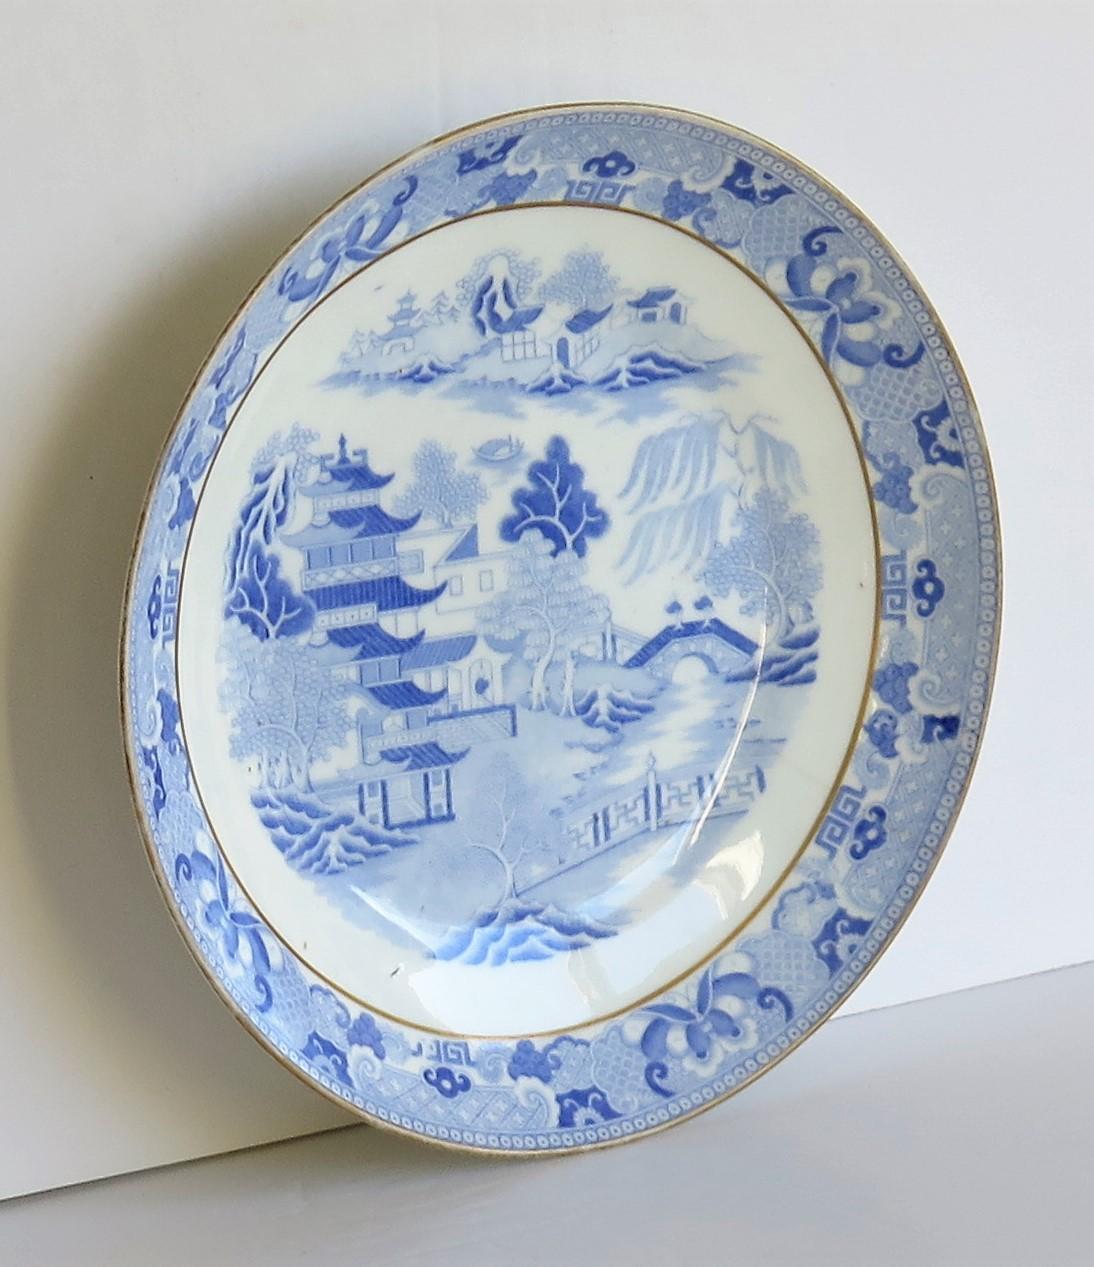 This is a porcelain blue and white, hand gilded plate or dish made by Miles Mason (Mason's), Staffordshire Potteries, England, dating to circa 1810. 

The plate is well potted on a low foot.

It is decorated in the under-glaze blue printed